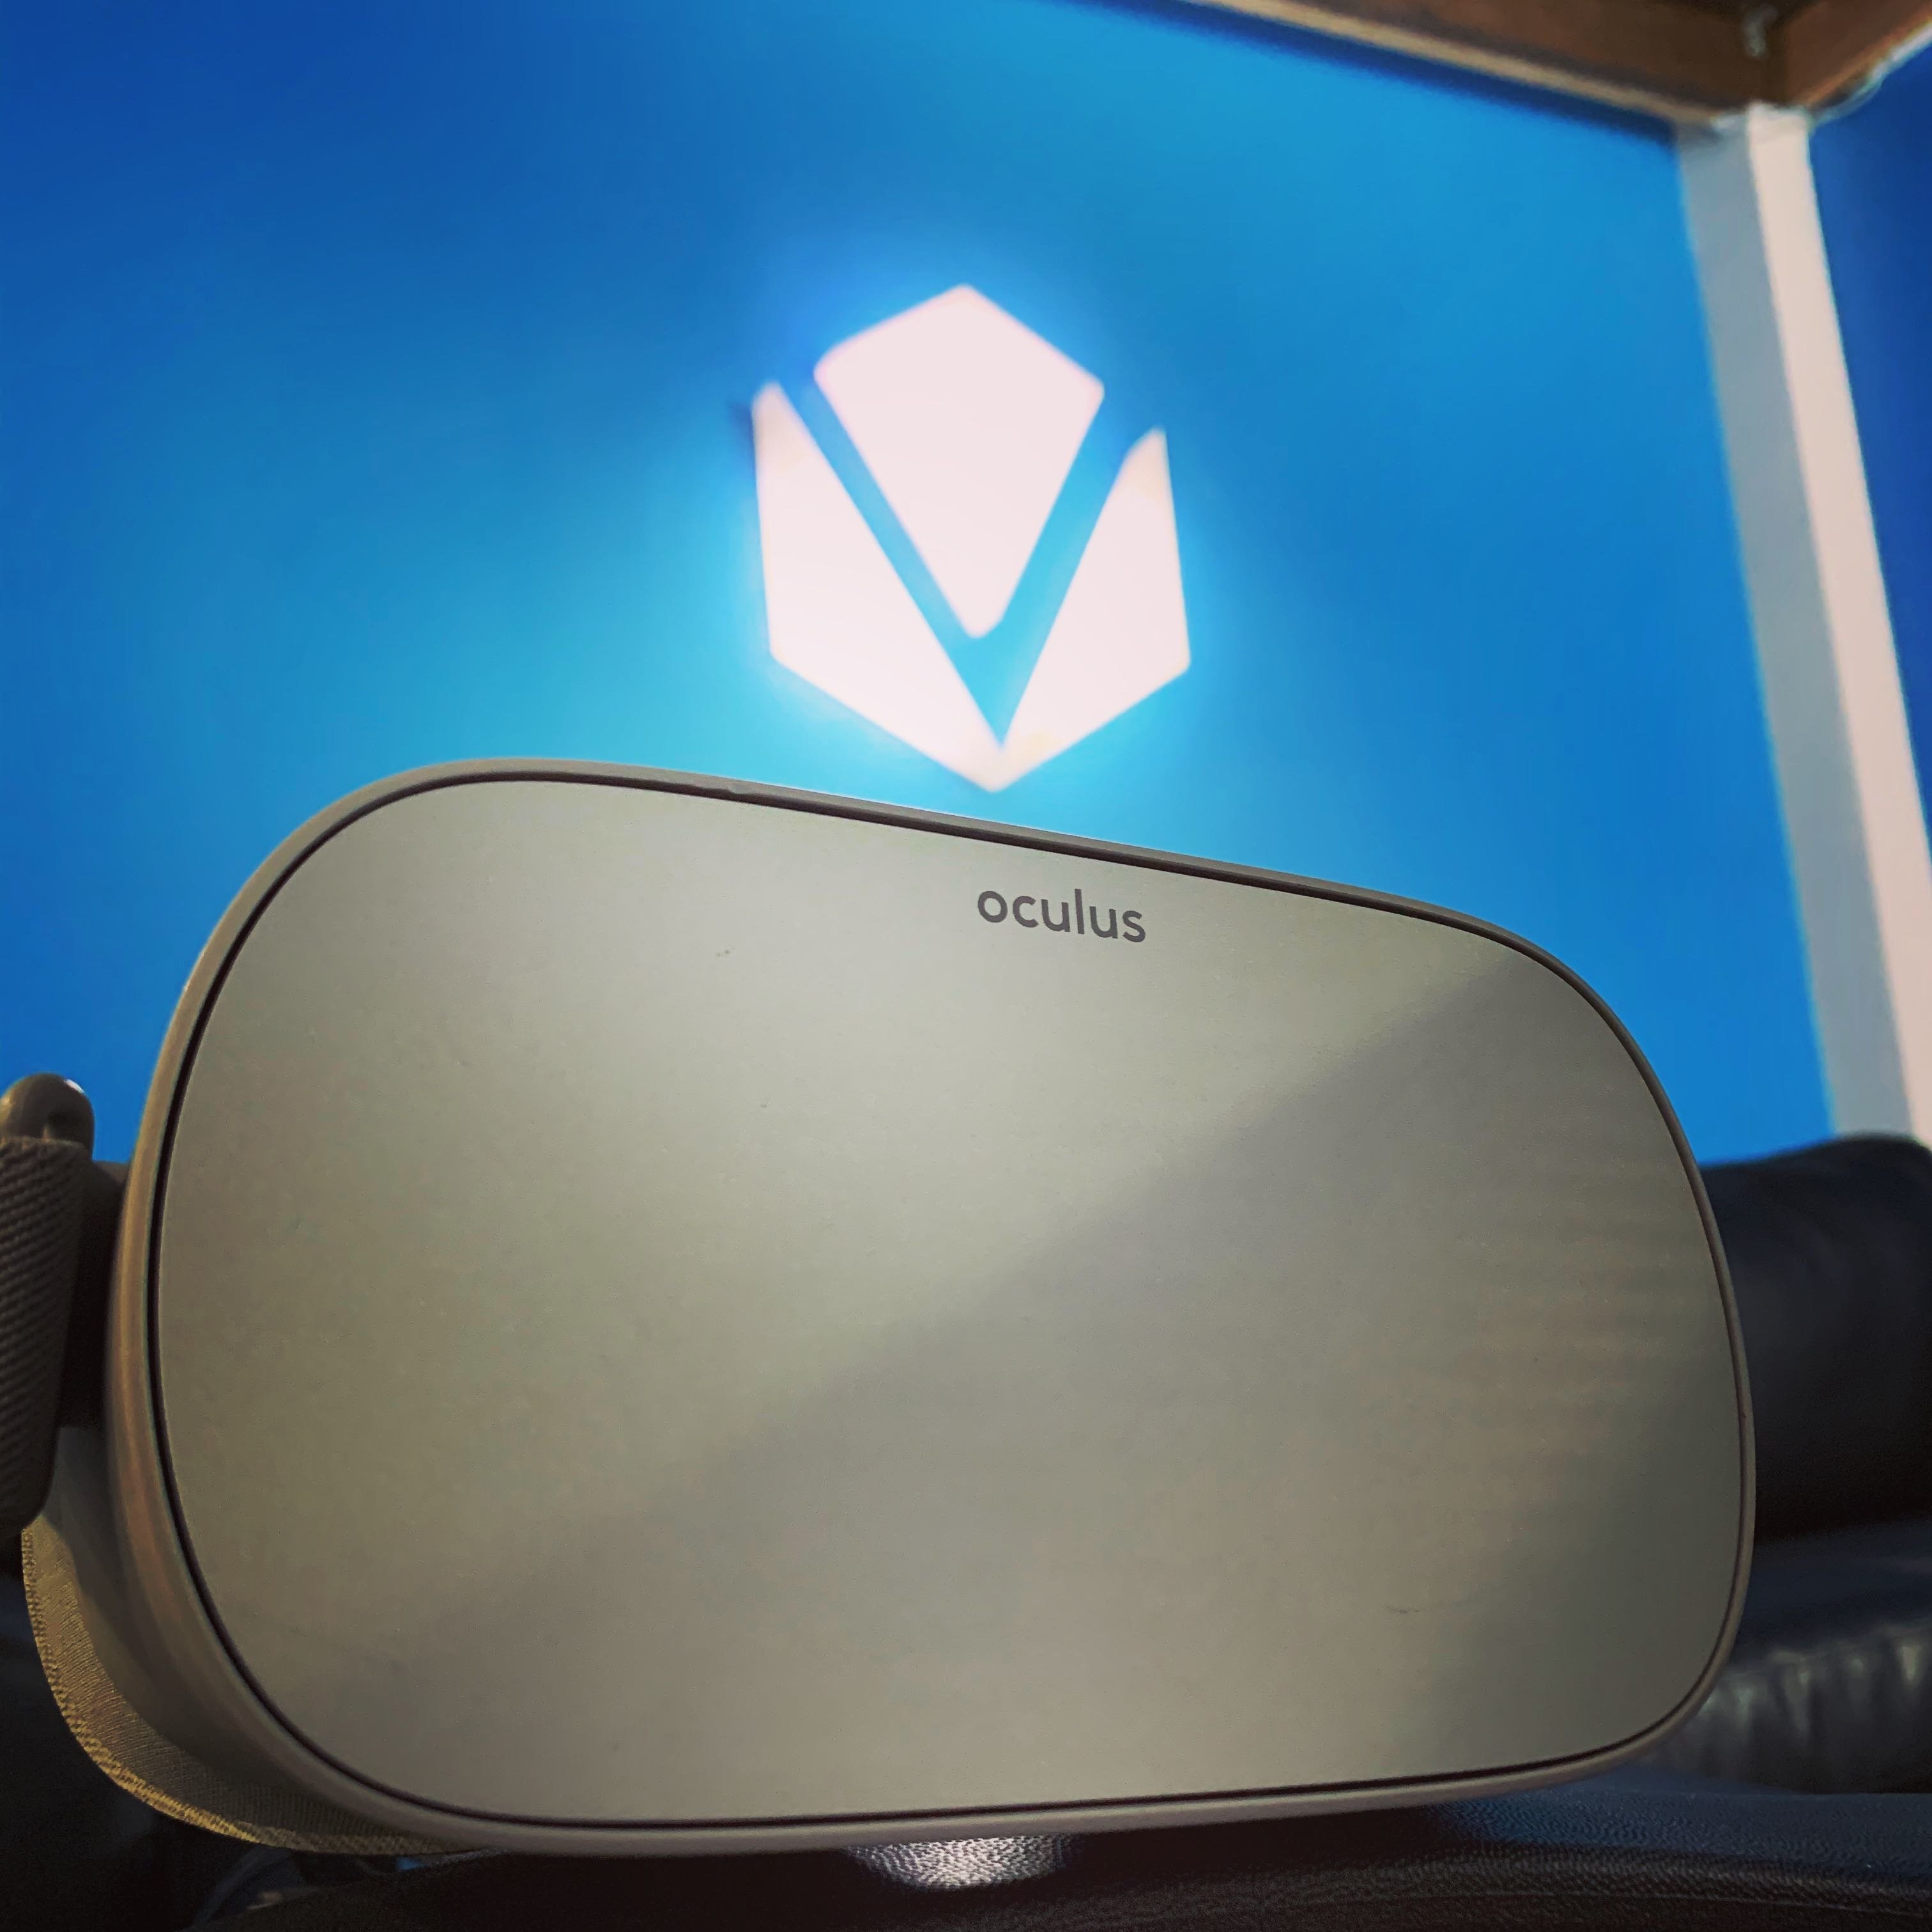 vSpatial on Twitter: "@vSpatialVR is coming to the @oculus GO next week. Stay tuned on how you can connect to your PC and your teams from anywhere #thefutureofwork #vr #productivity #startup #